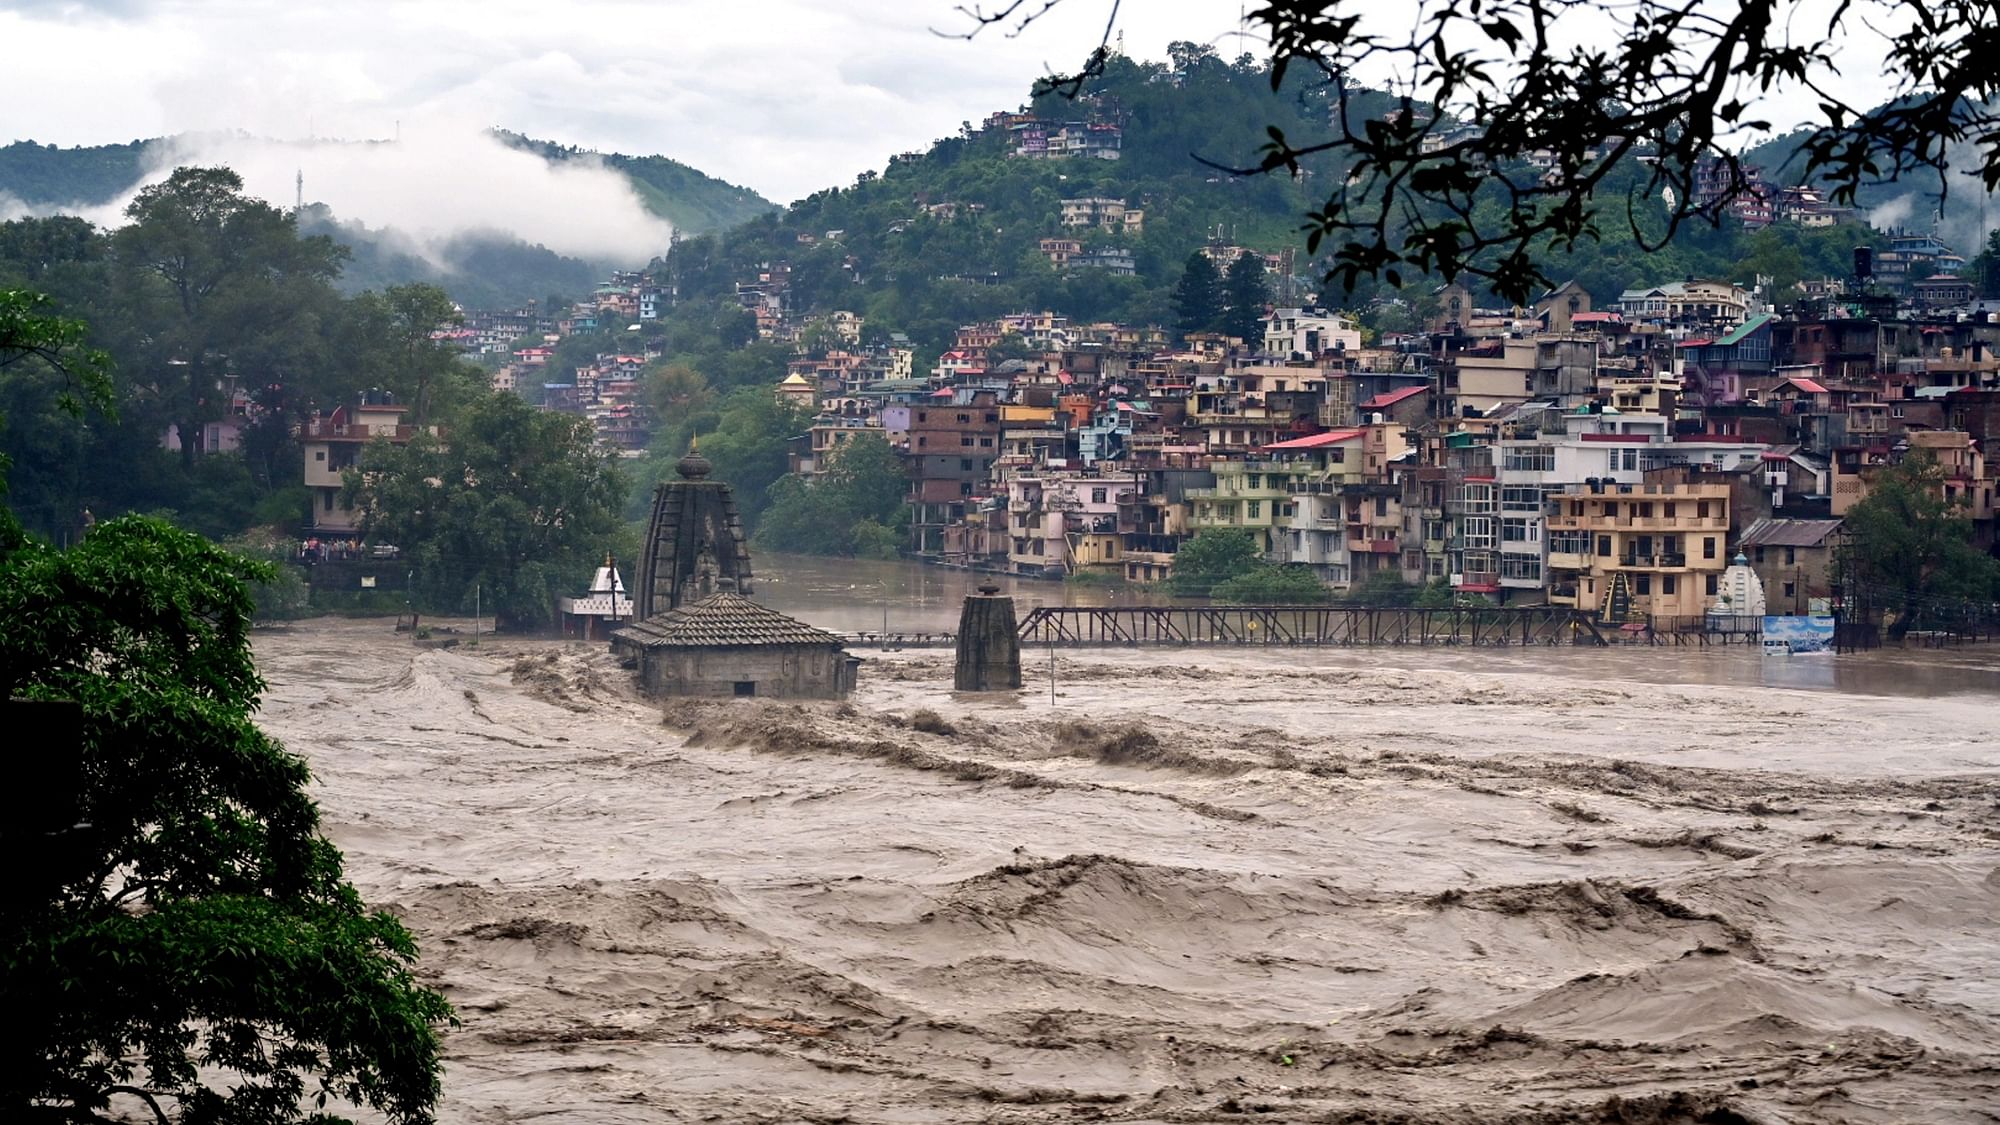 <div class="paragraphs"><p>A submerged Panchvaktra temple in swollen Beas river due to heavy monsoon rainfall, in Mandi district of Himachal Pradesh, on 9 July.&nbsp;</p></div>